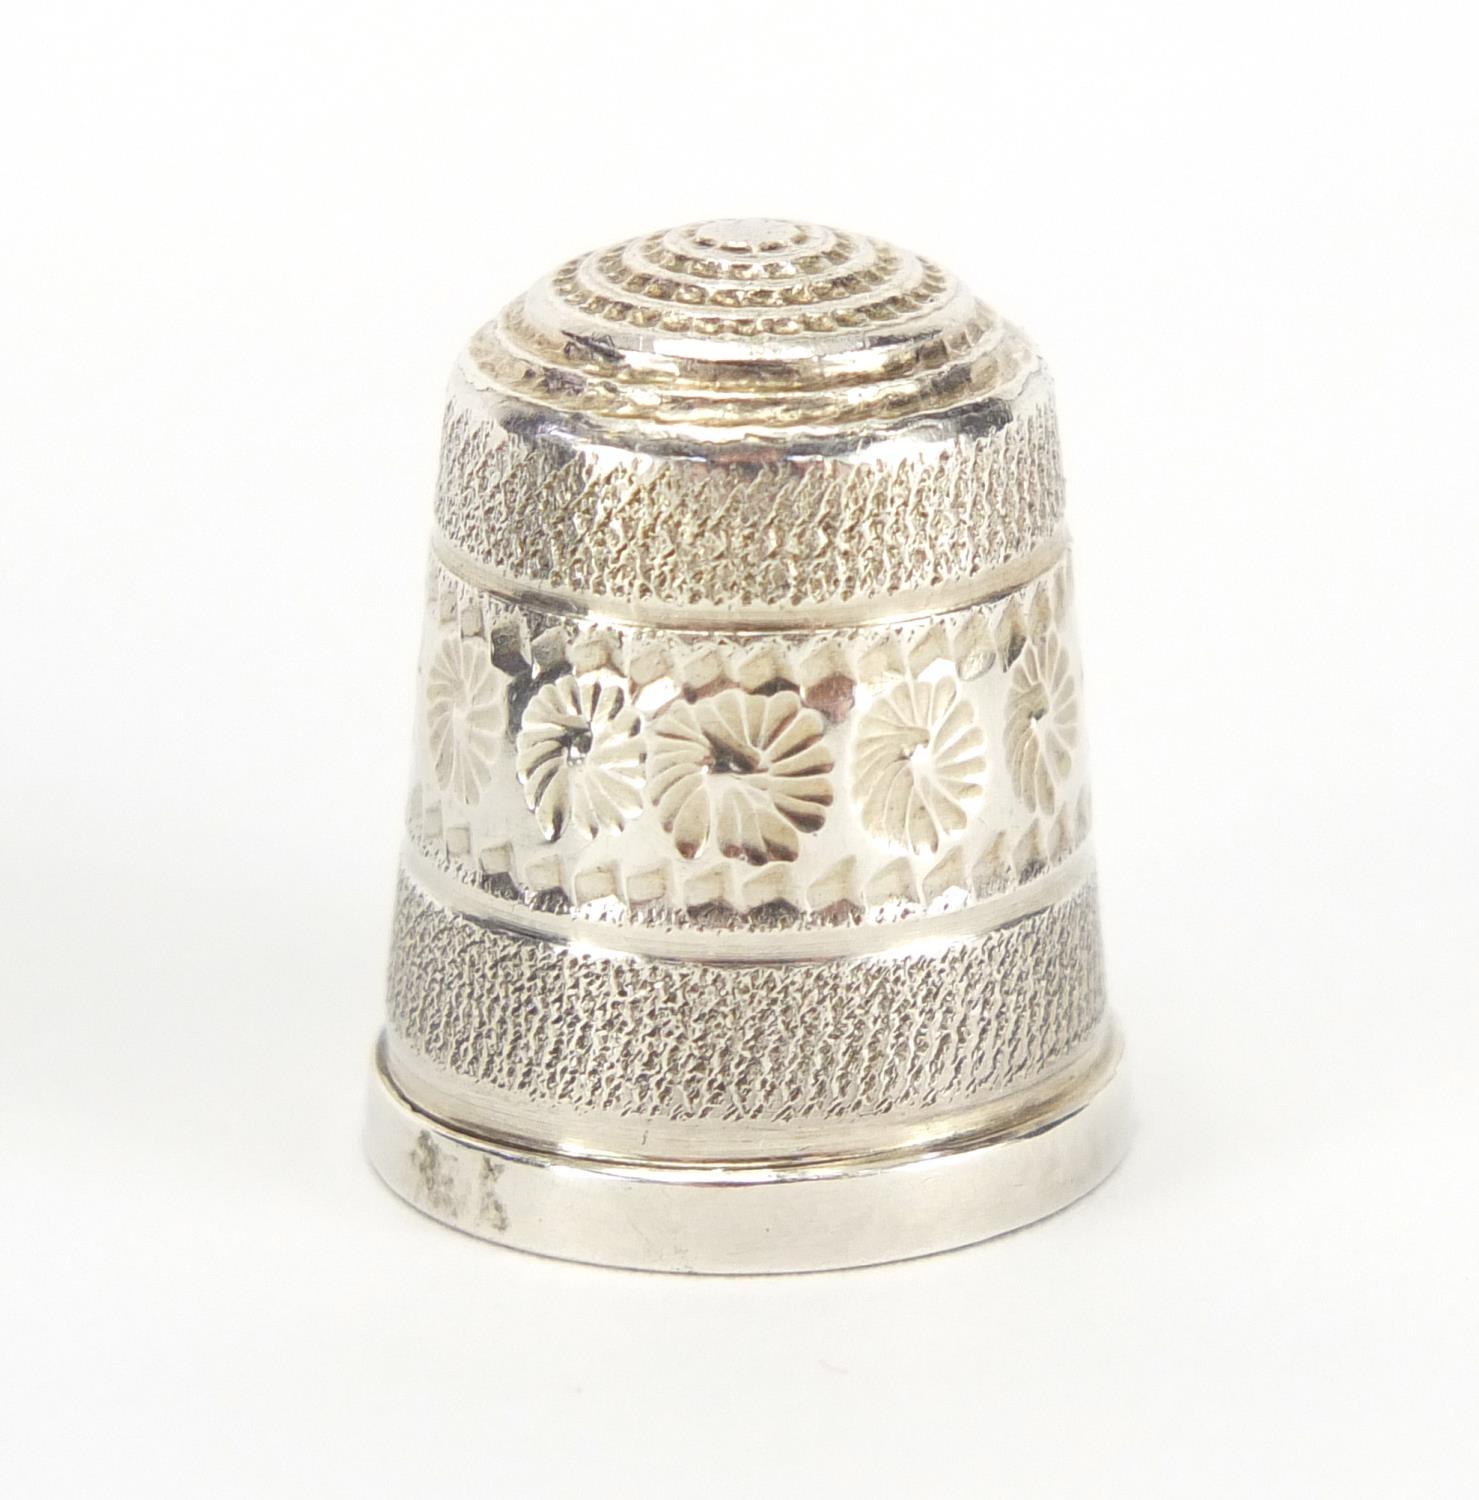 Sewing interest silver topped Lignum vitae cotton reel stand, with thimble, Birmingham 1989, 8cm - Image 4 of 5